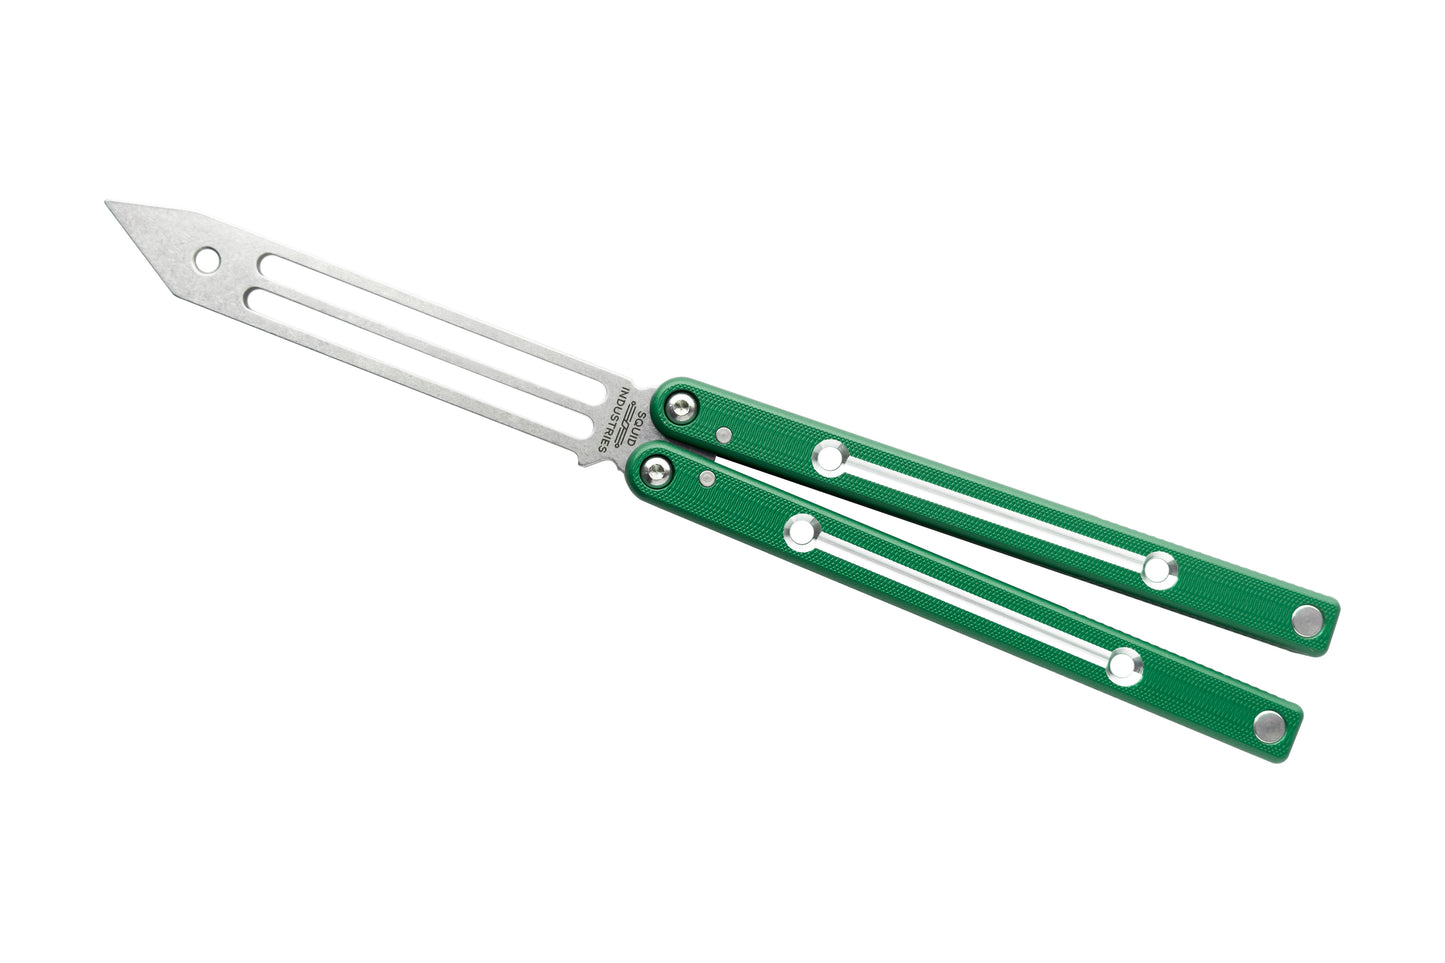 Dual-Tone Green Clearance Blemished Squidtrainer V4 Balisong Butterfly Knife Trainer 